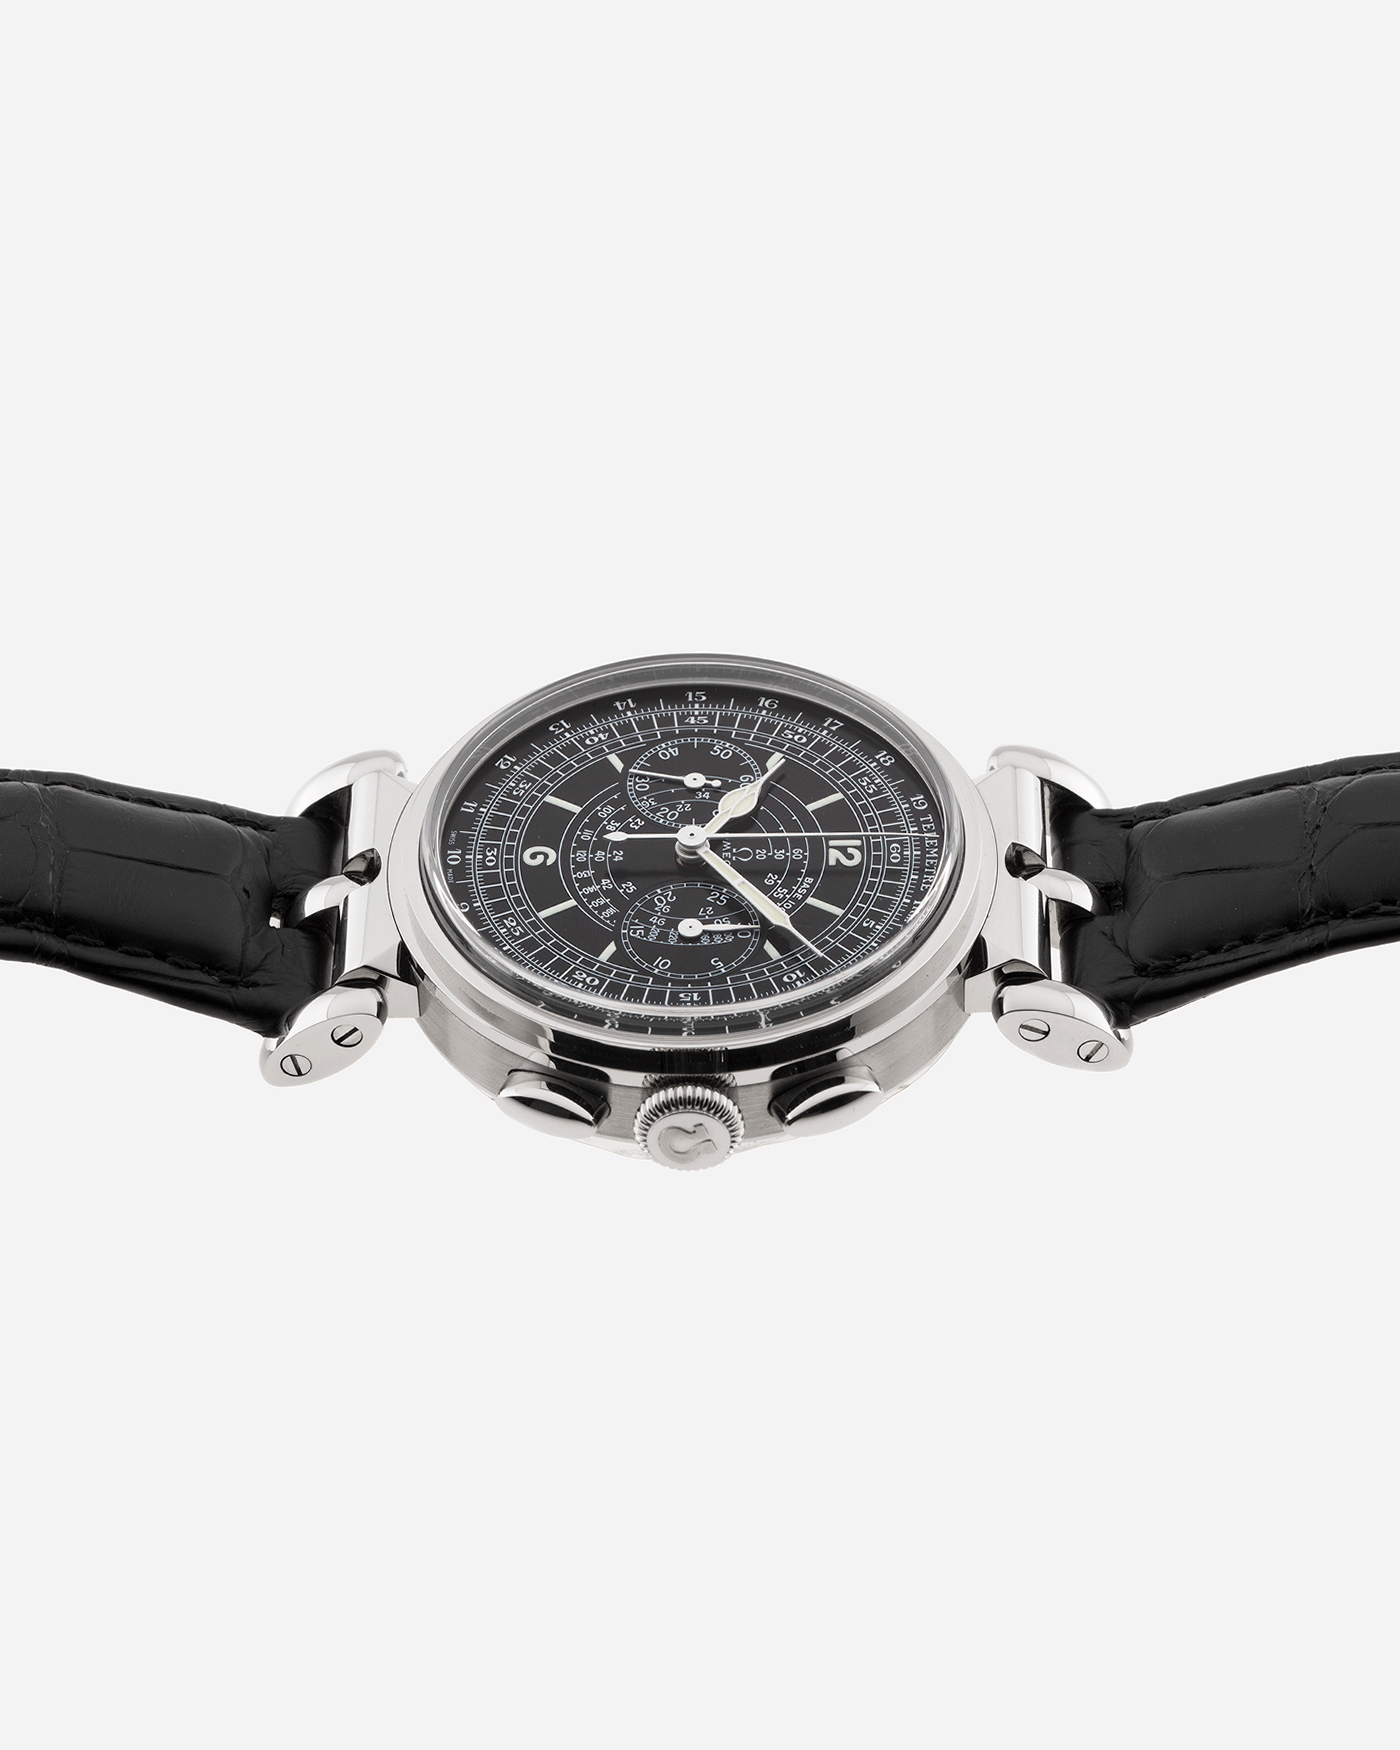 Brand: Omega Year: 2009 Model: Milestone Museum Collection 1941 Officer’s Chronograph Material: 18k White Gold Movement: Manual Winding Omega in-house 3203 Case Diameter: 38.1mm wide 12mm thick Strap: Black Omega Alligator Strap with 18k White Gold Omega Tang Buckle